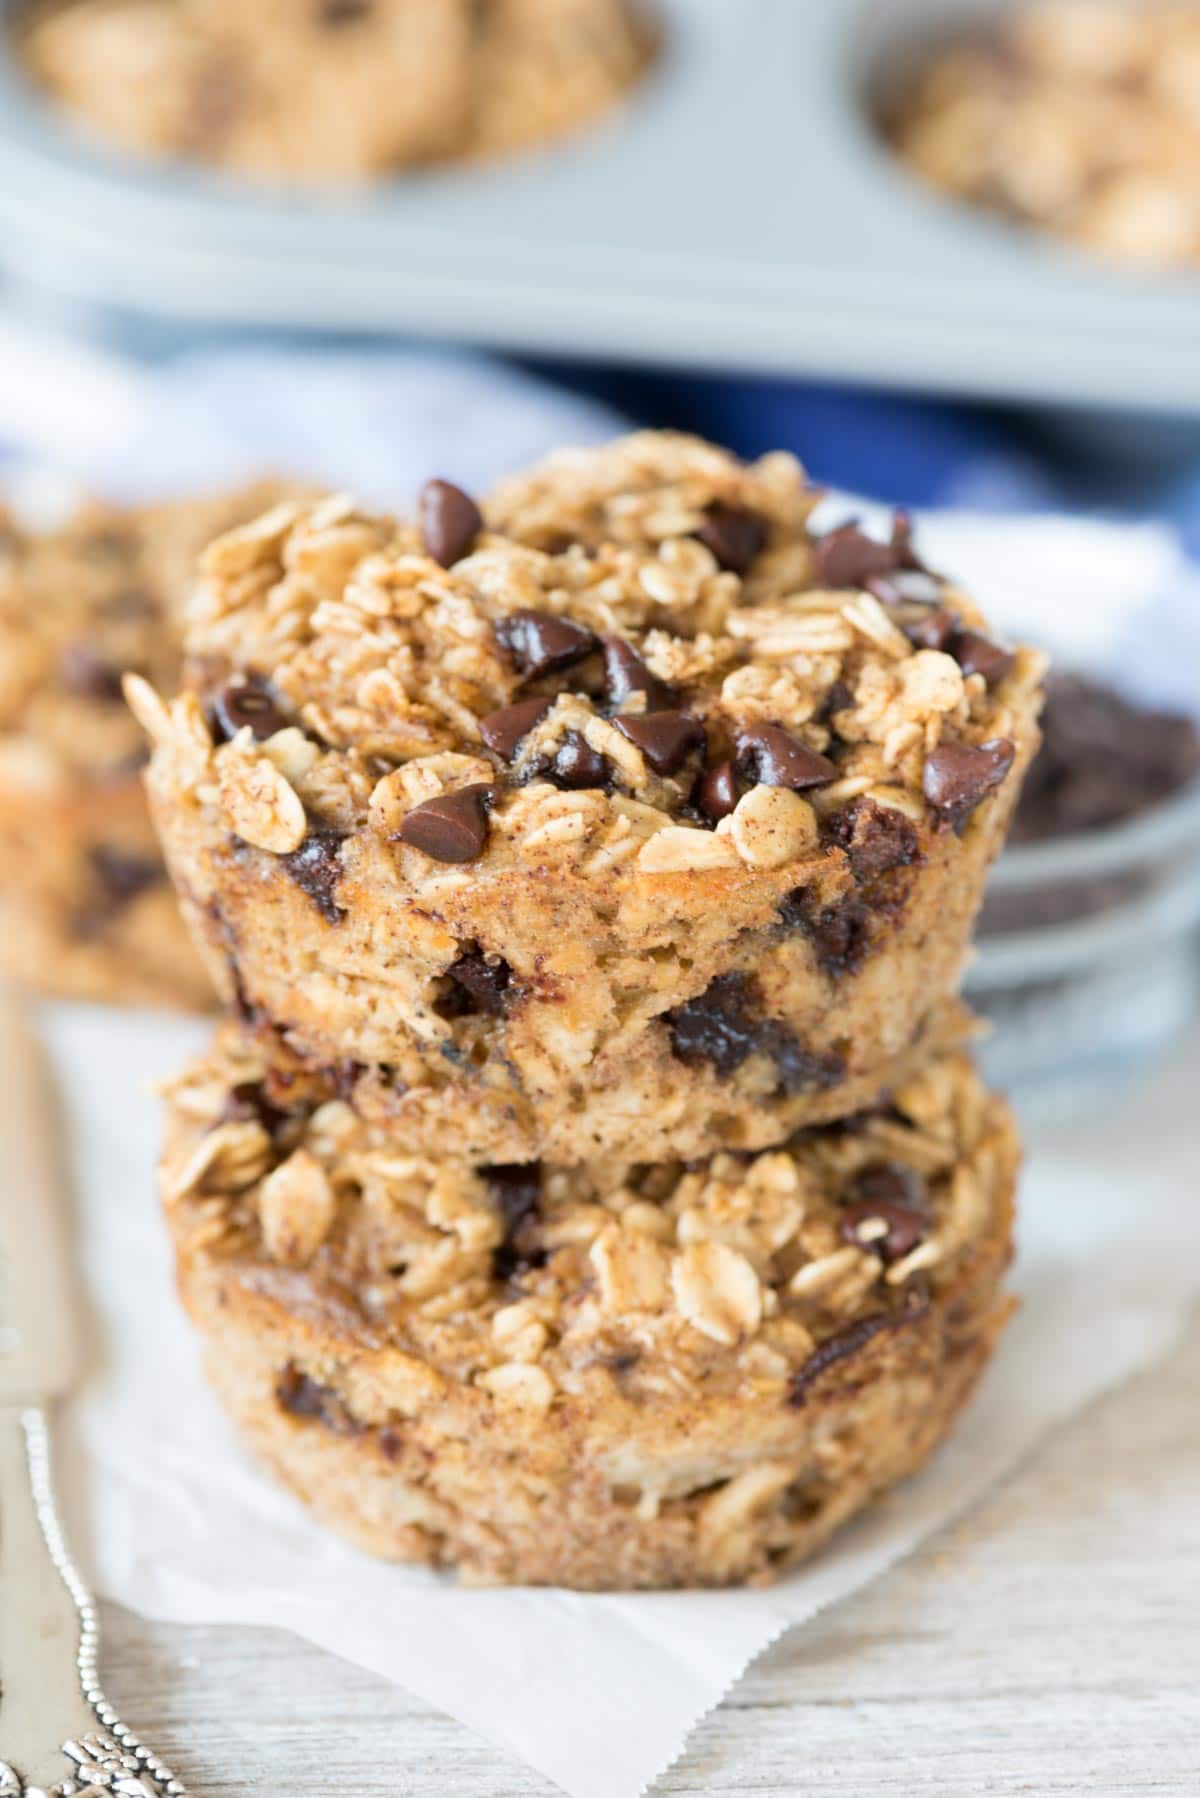 Chocolate Chip Baked Oatmeal Muffins - this EASY breakfast recipe is great for on the go! It's a healthier muffin that's dairy free and has no oil or flour but tastes like an amazing chocolate chip dessert!